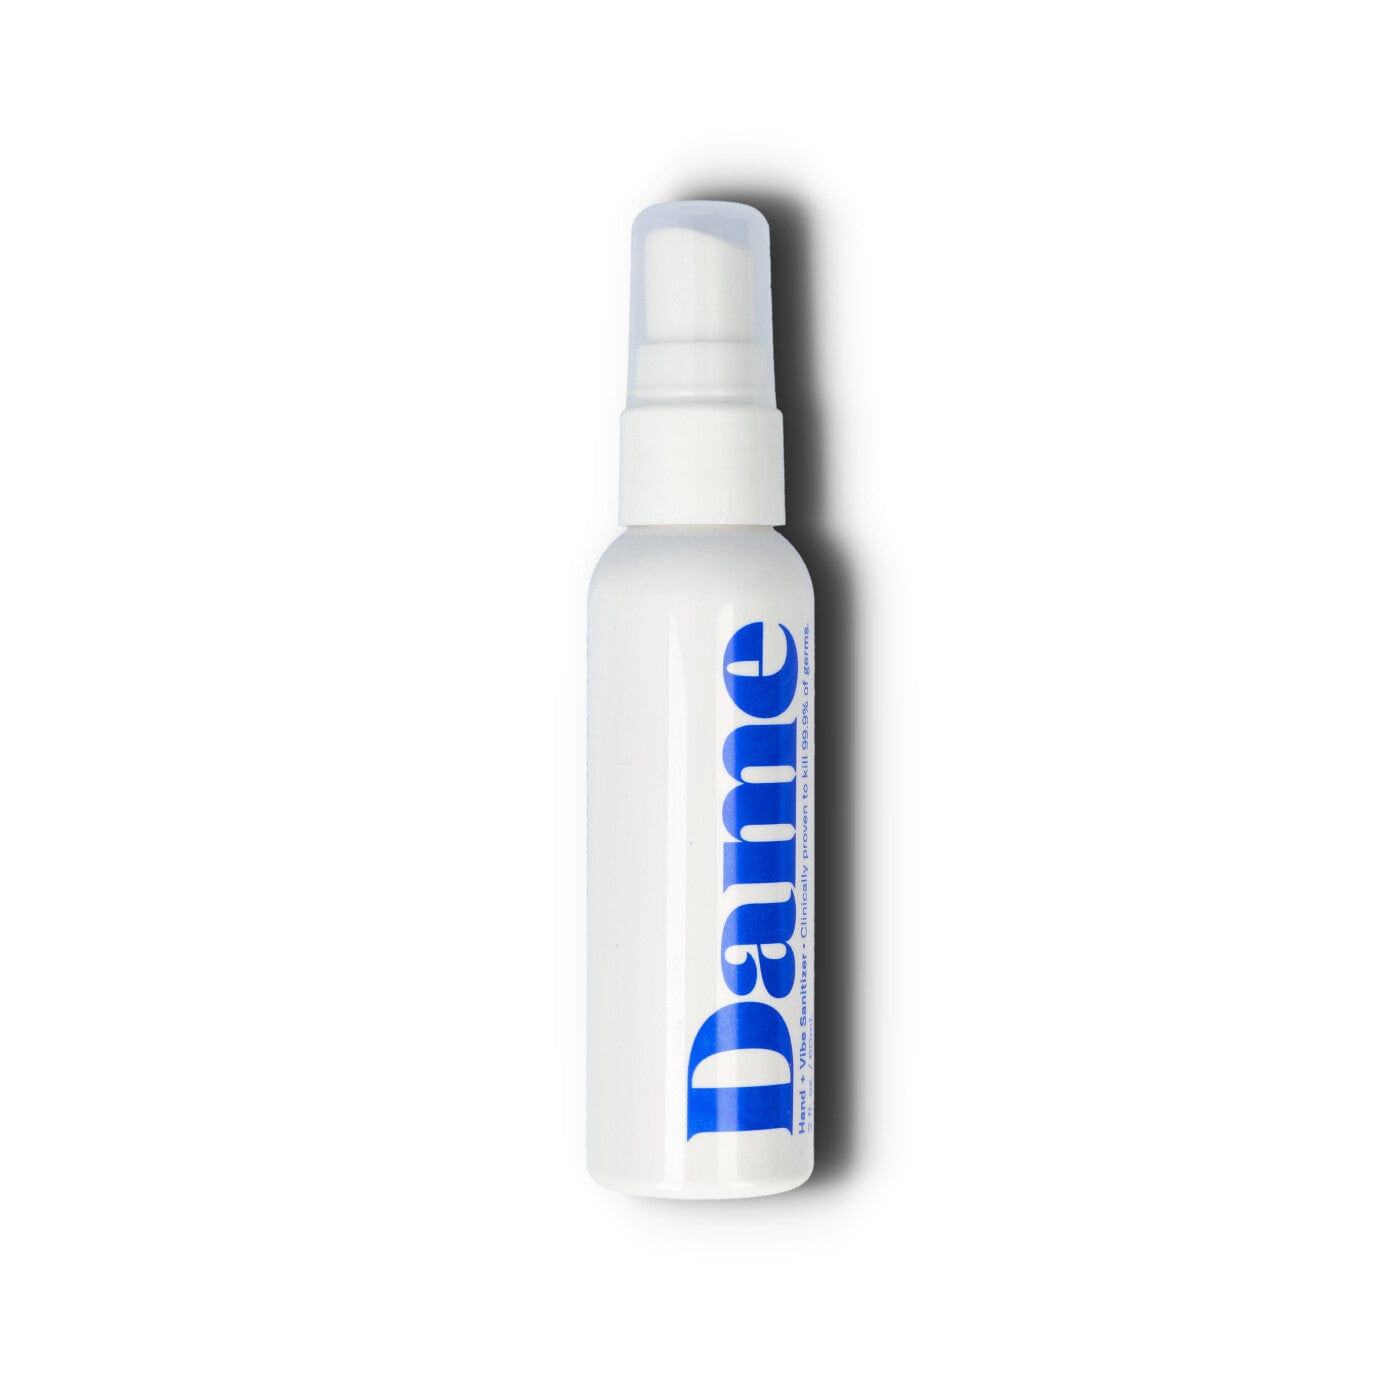 Dame products hand and vibe cleaner